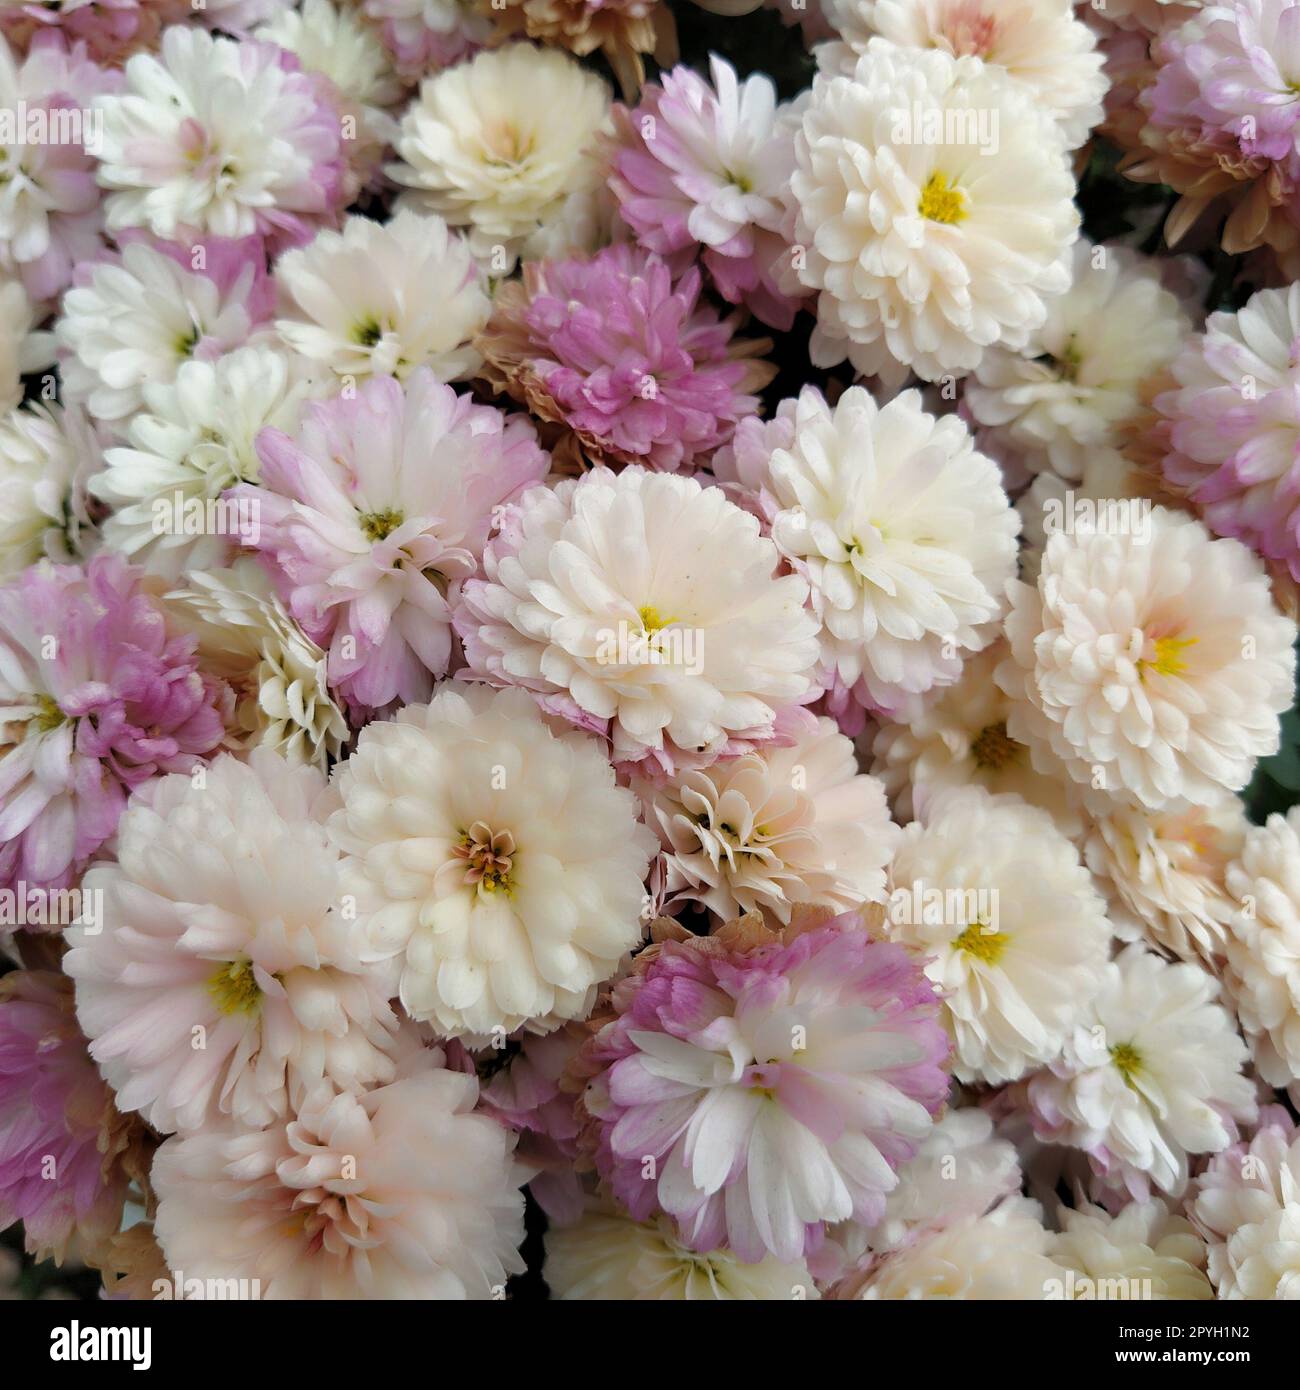 Flowers wall background with amazing white, pink, purple and yellow chrysanthemum flowers. Wedding decoration.  Beautiful flower bad wall background. Landscape design of the autumn garden. Stock Photo